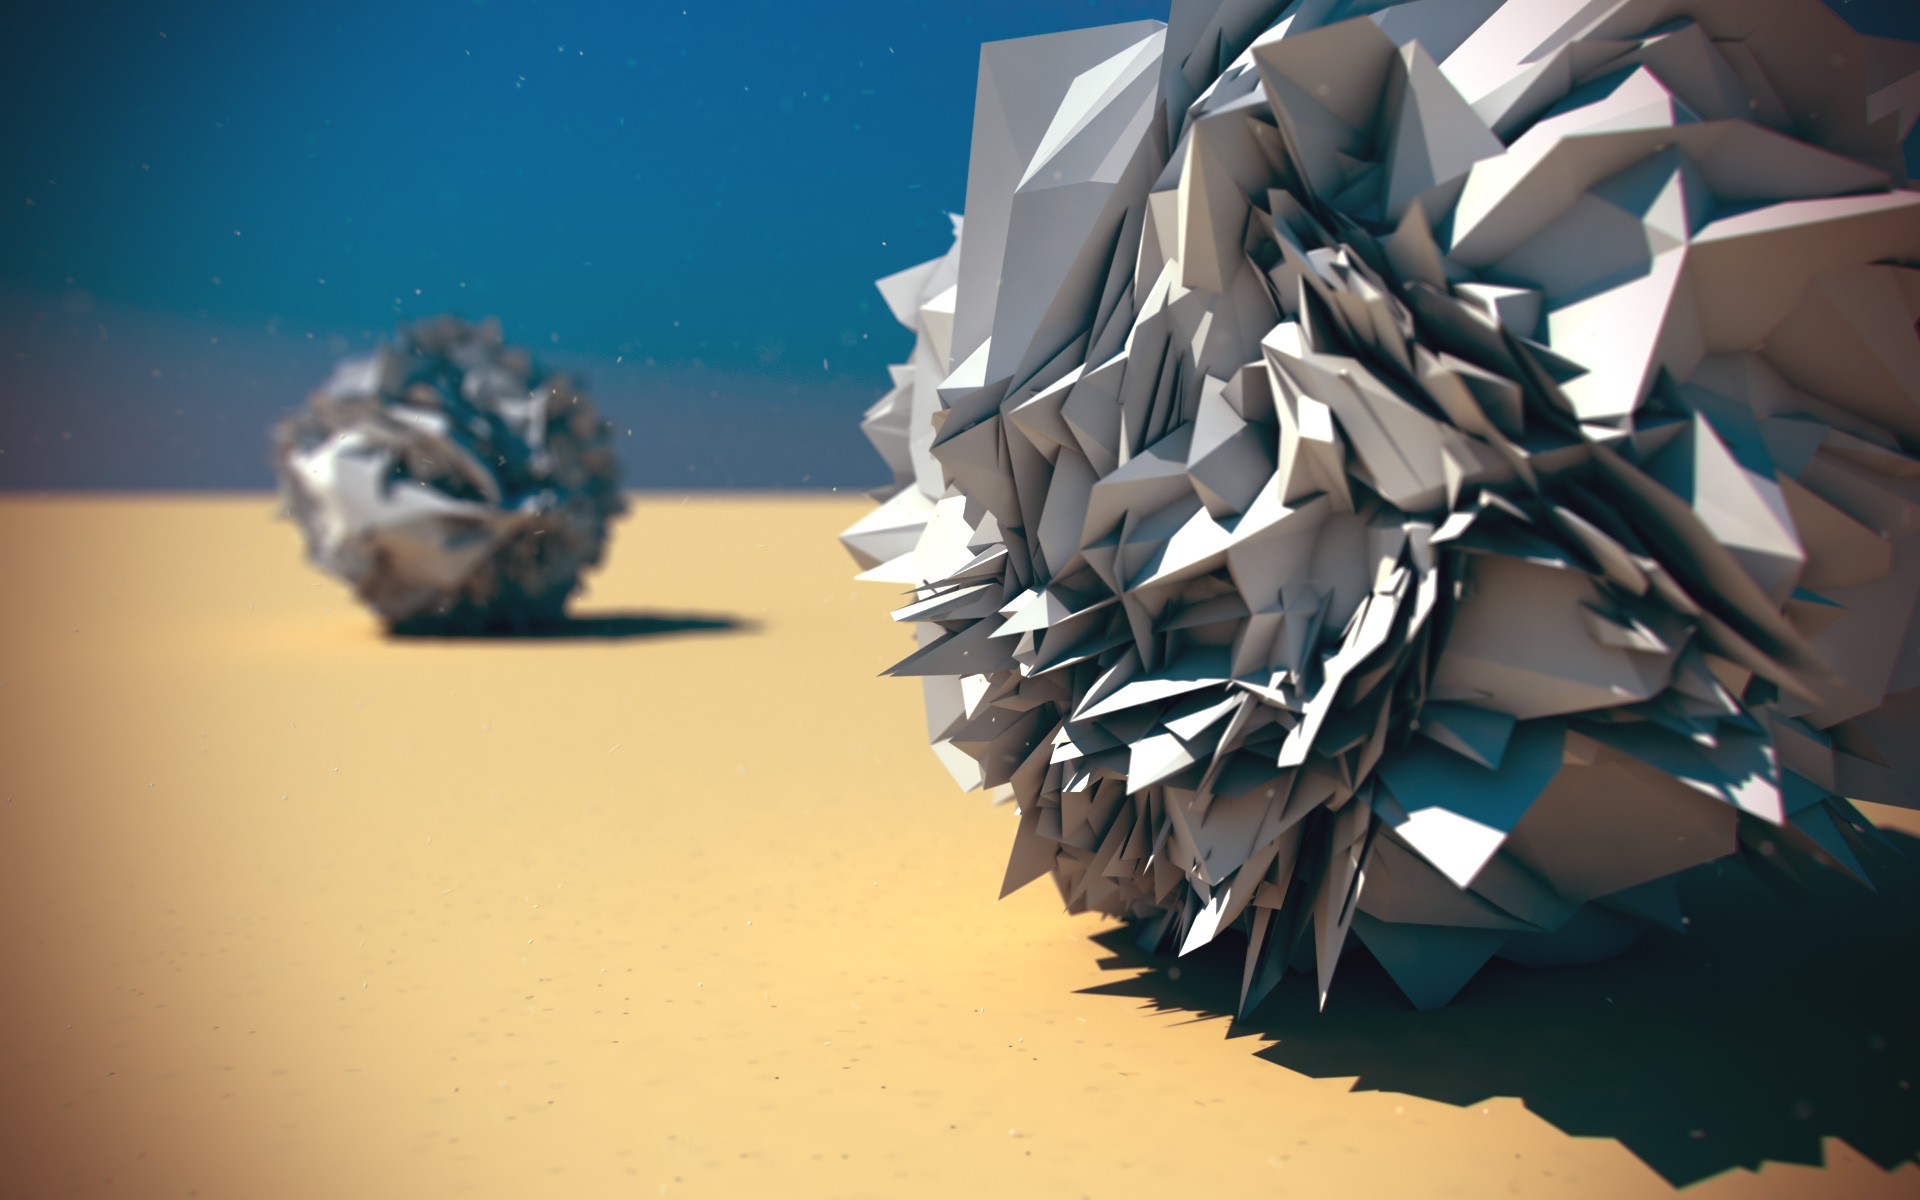 low Poly, Abstract, Digital Art Wallpaper